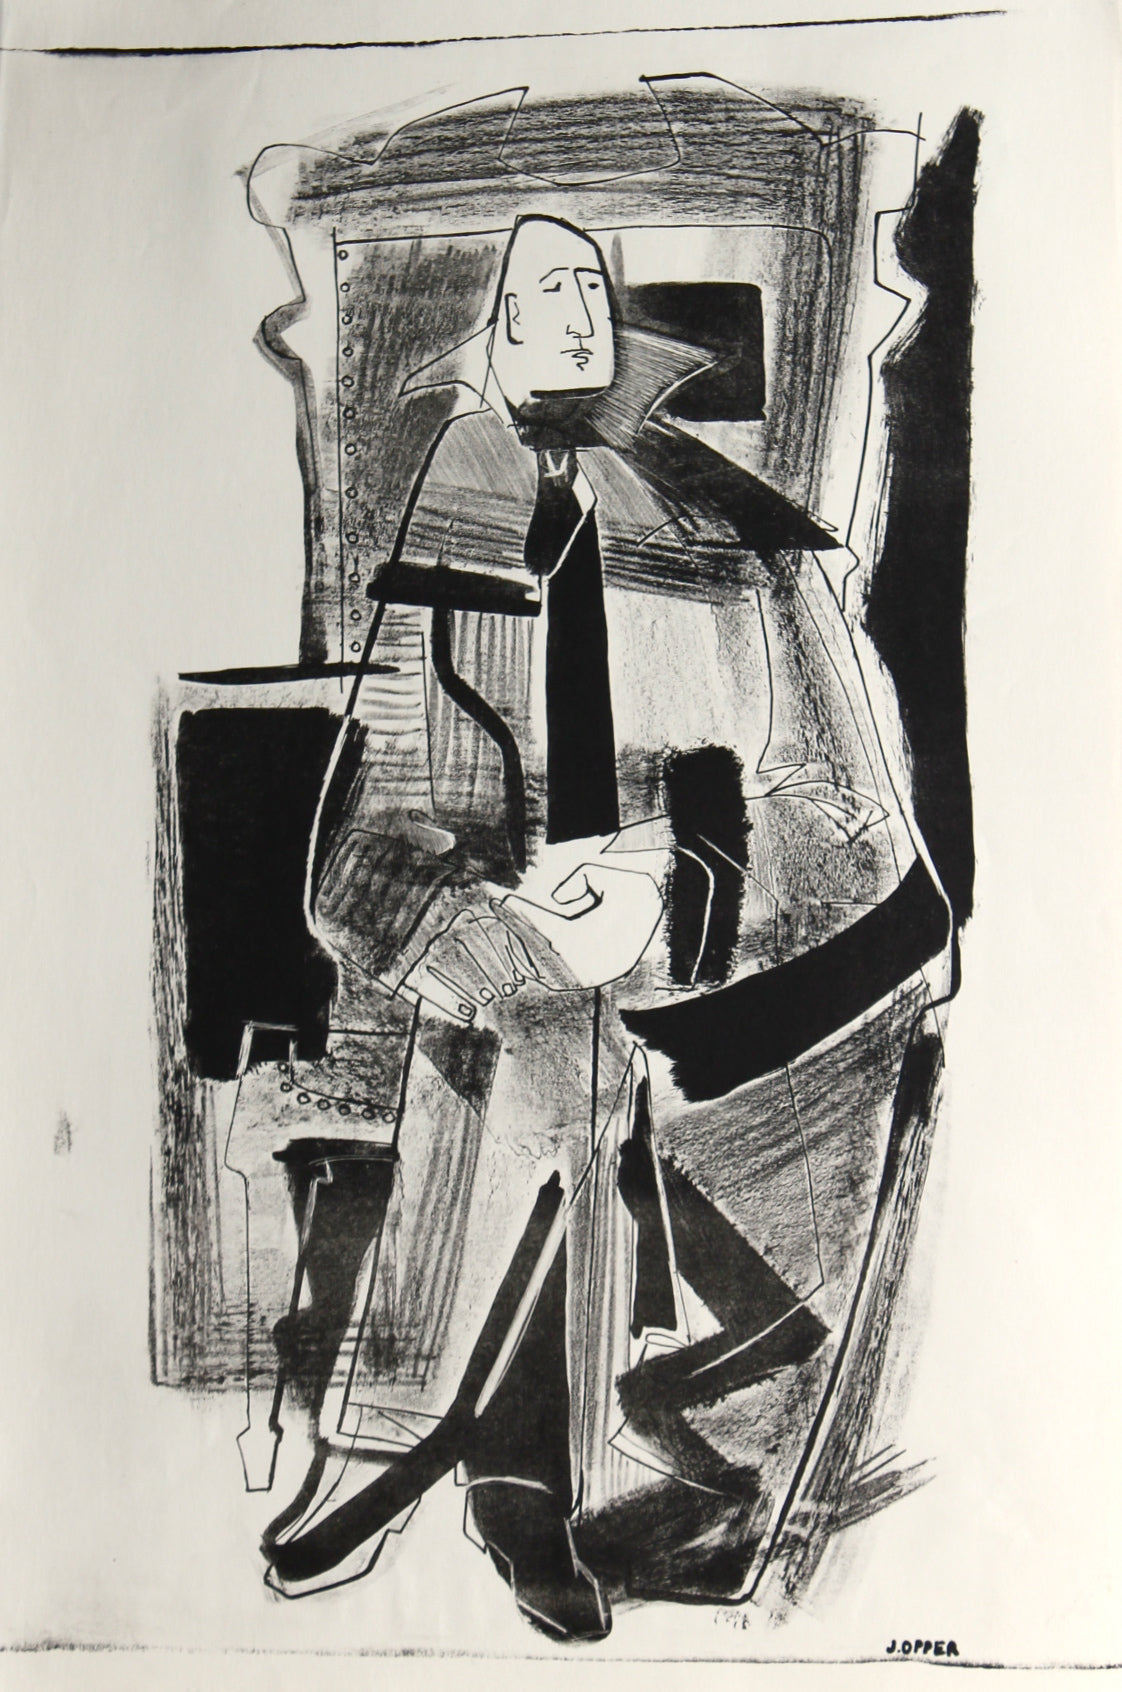 Abstracted Seated Figure &lt;br&gt;1940-50s Stone Lithograph&lt;br&gt;&lt;br&gt;#38871